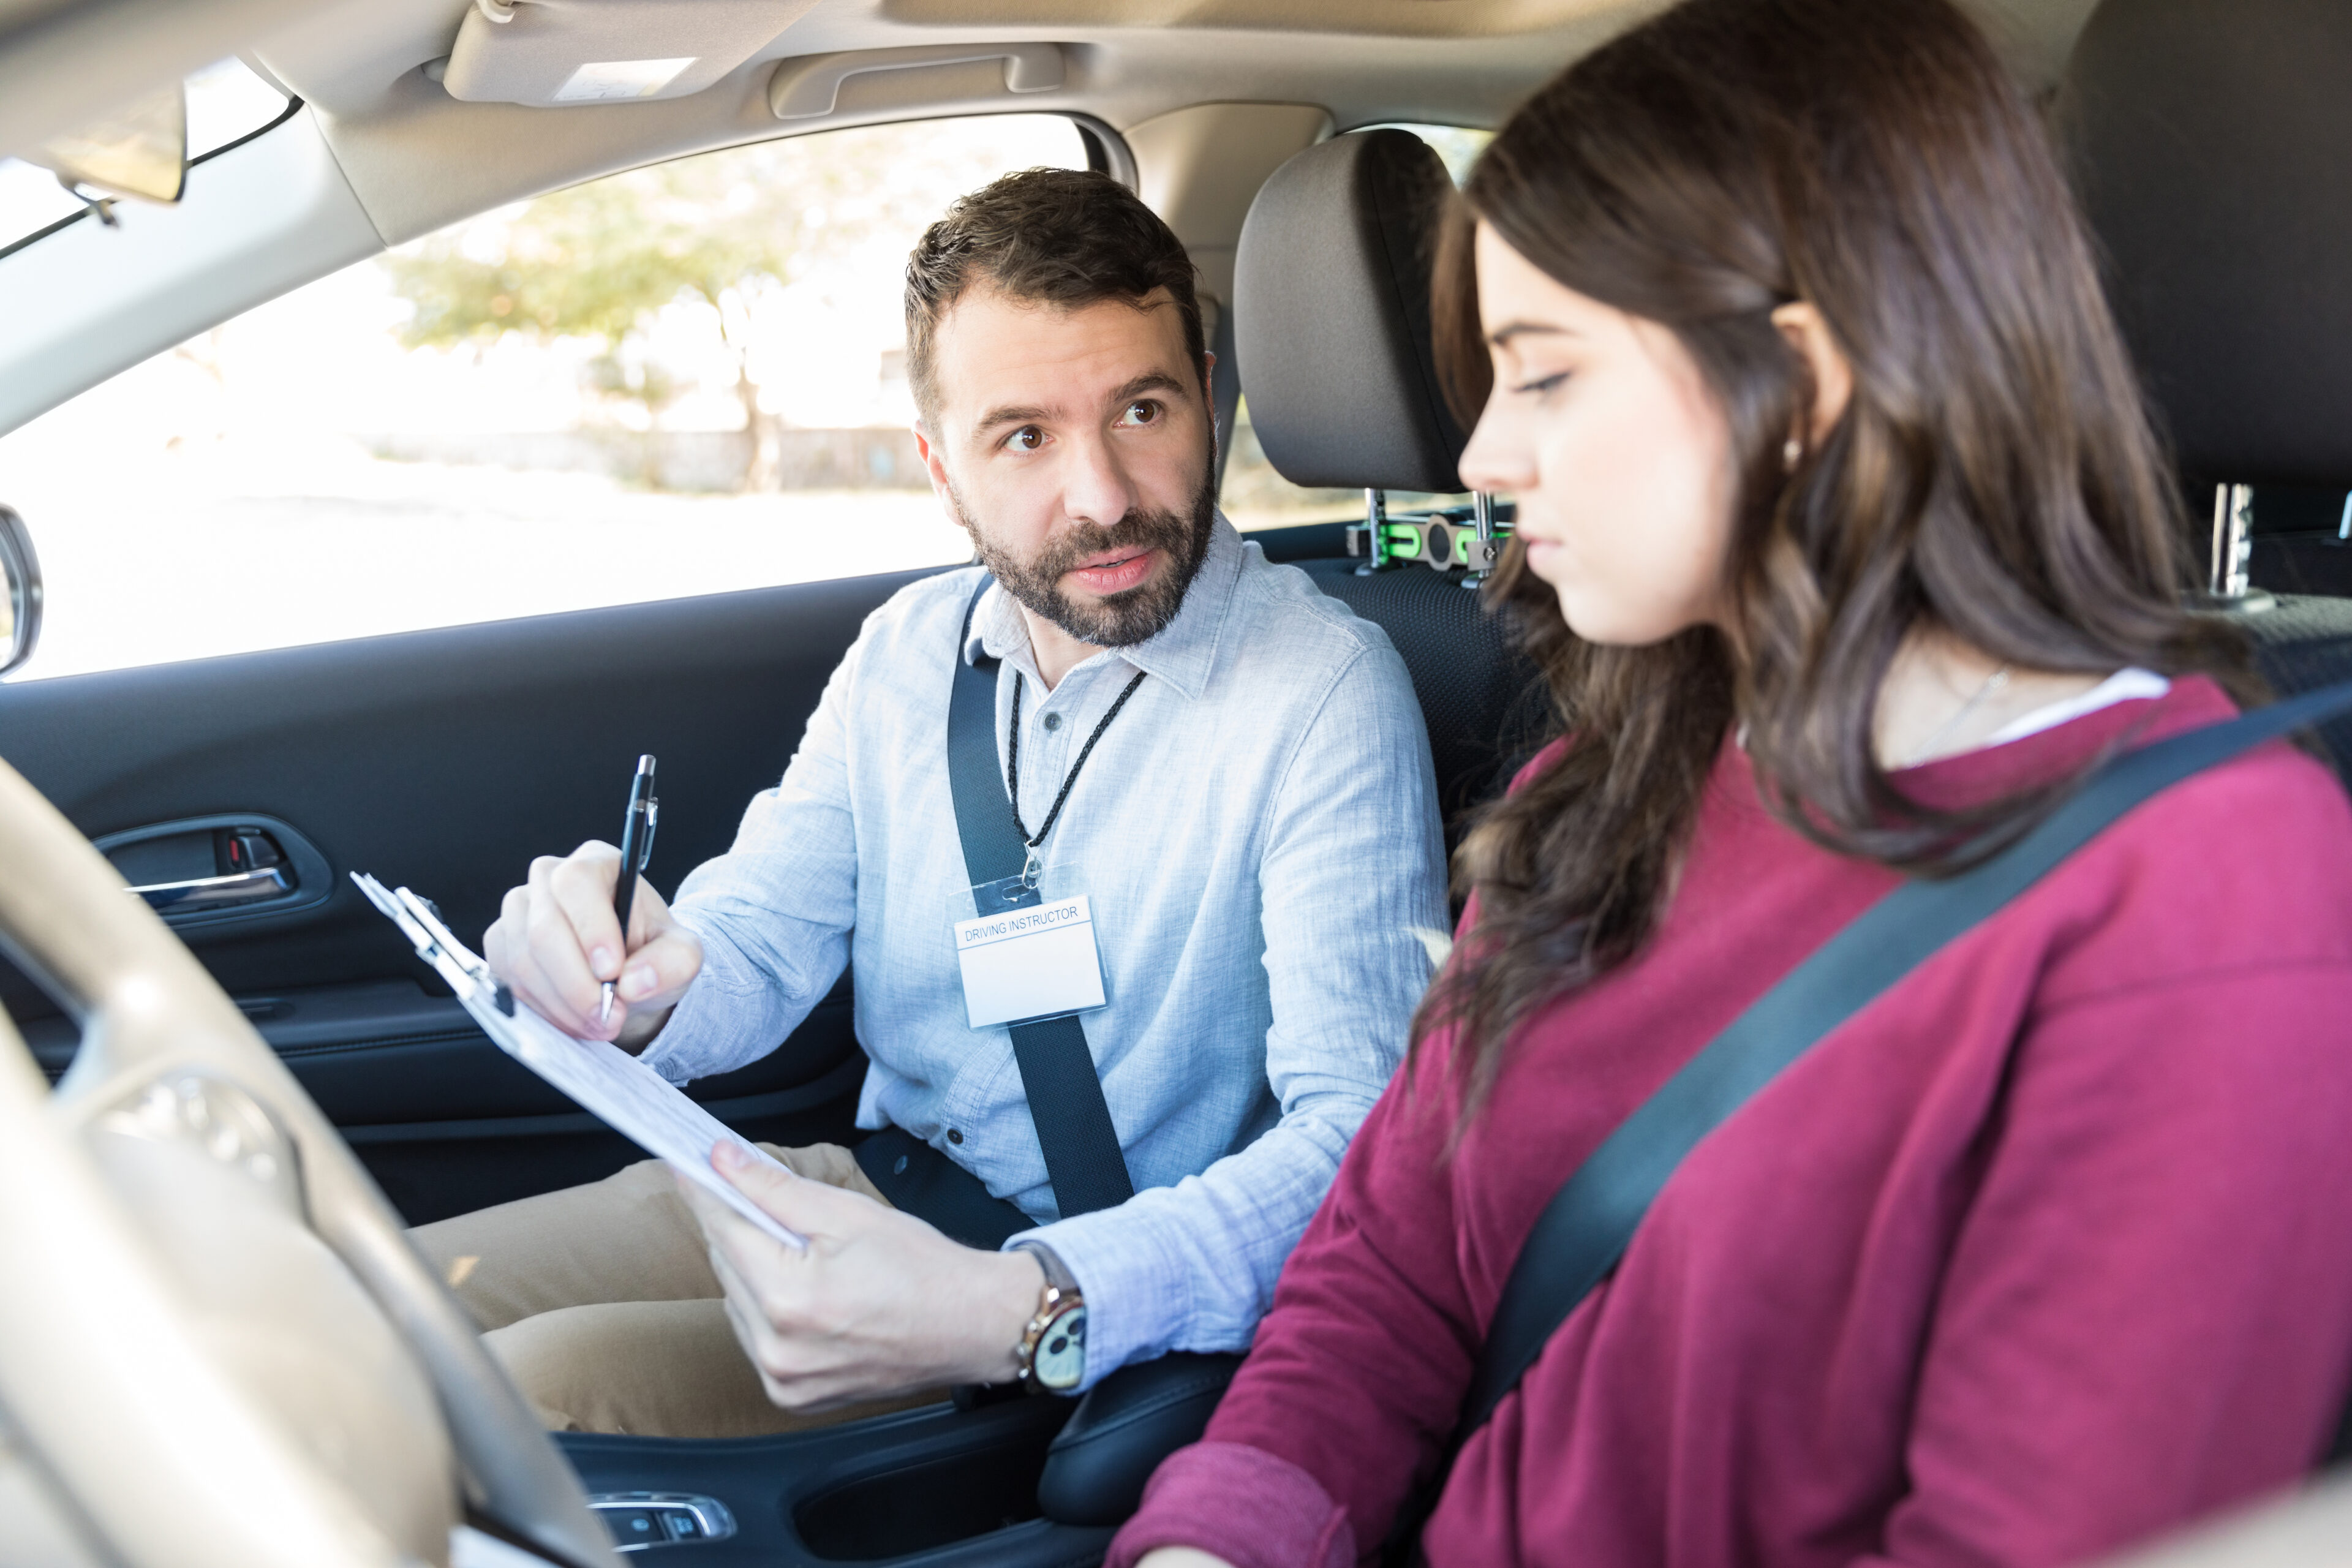 Driving instructor explaining checklist to learner driver